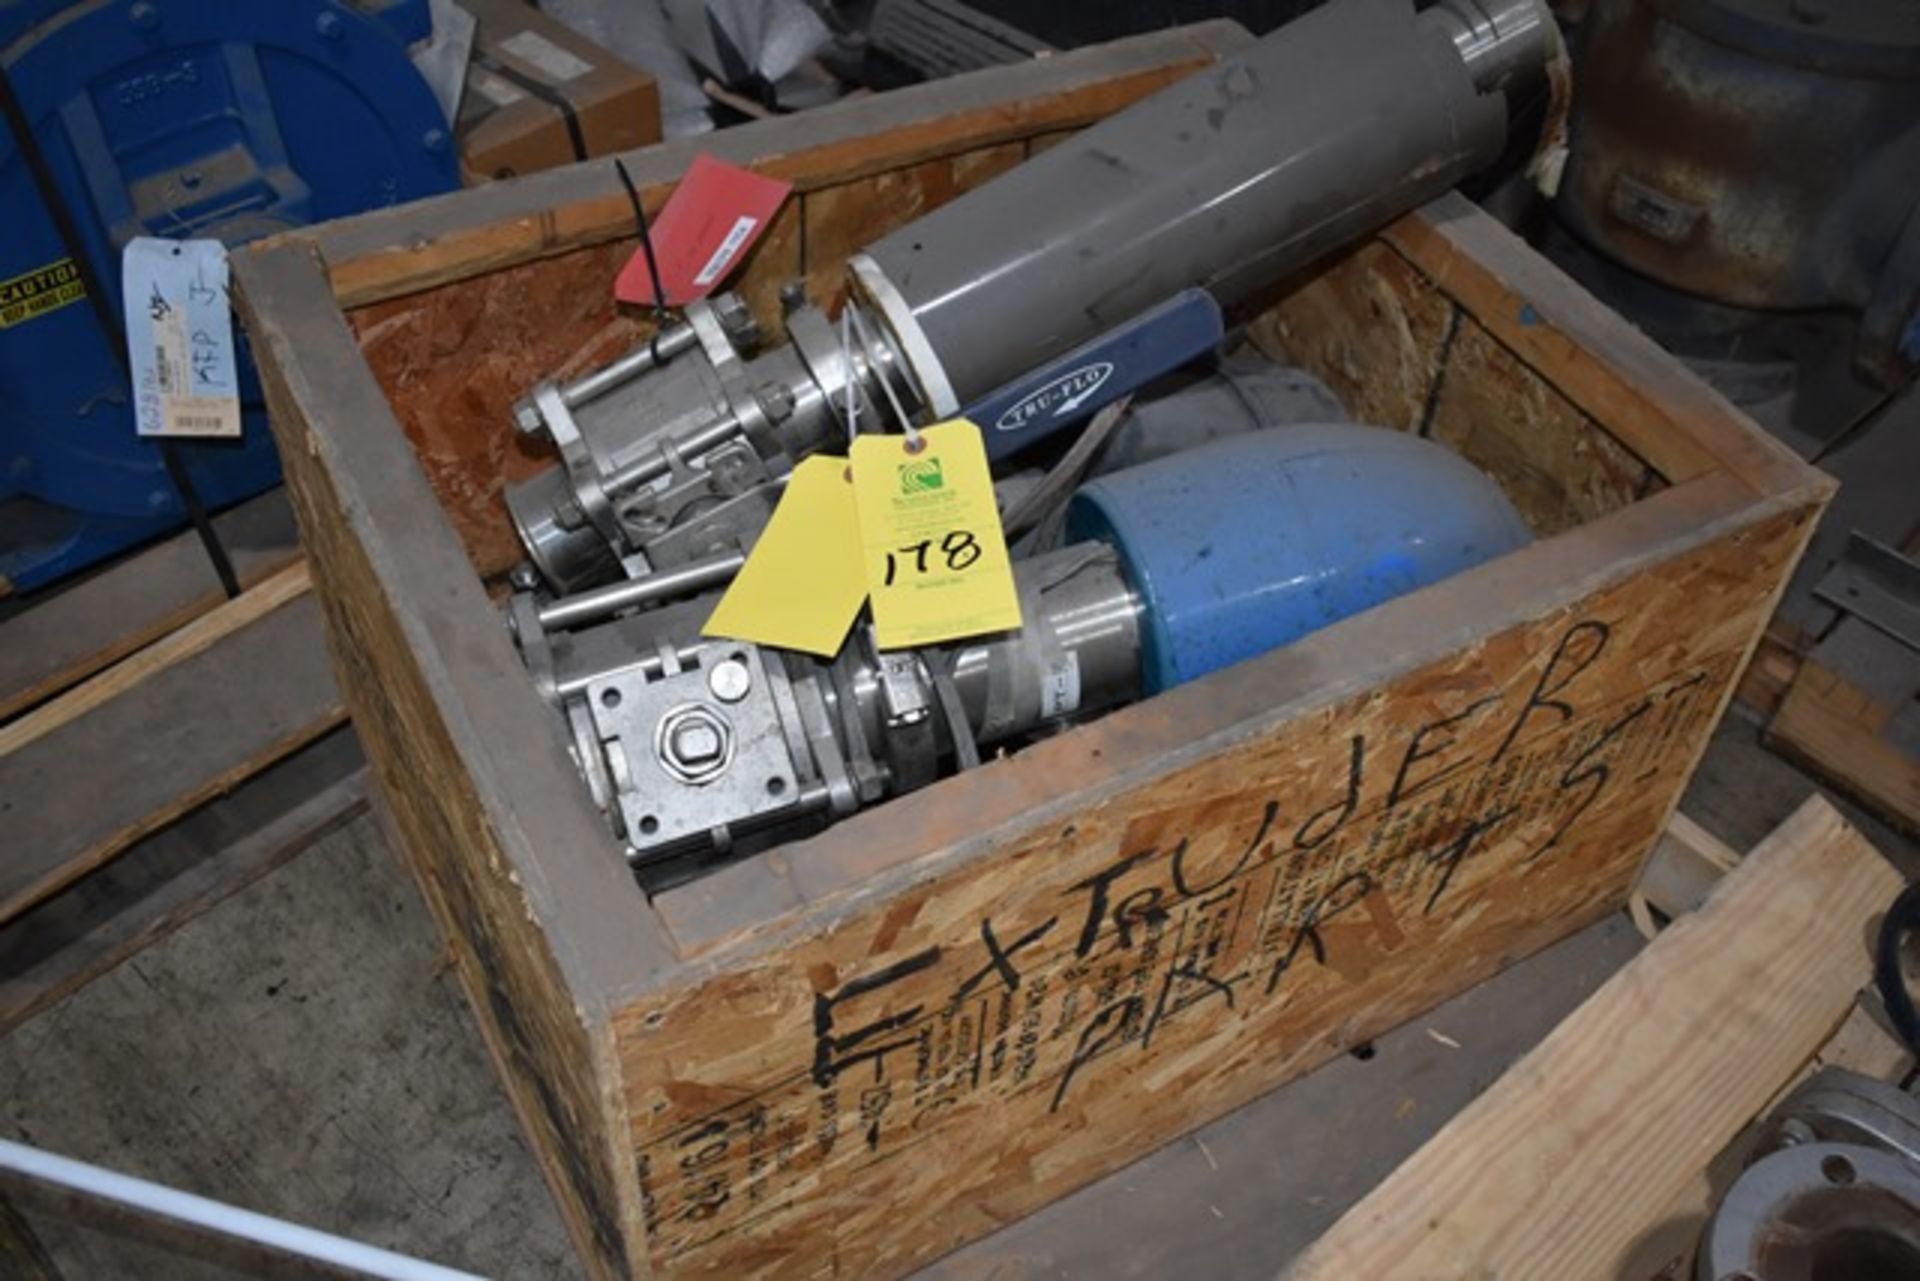 Crate - Extruder Parts & Components, Assorted SS Valves, 7-3". Rigging/Loading Fee: $25